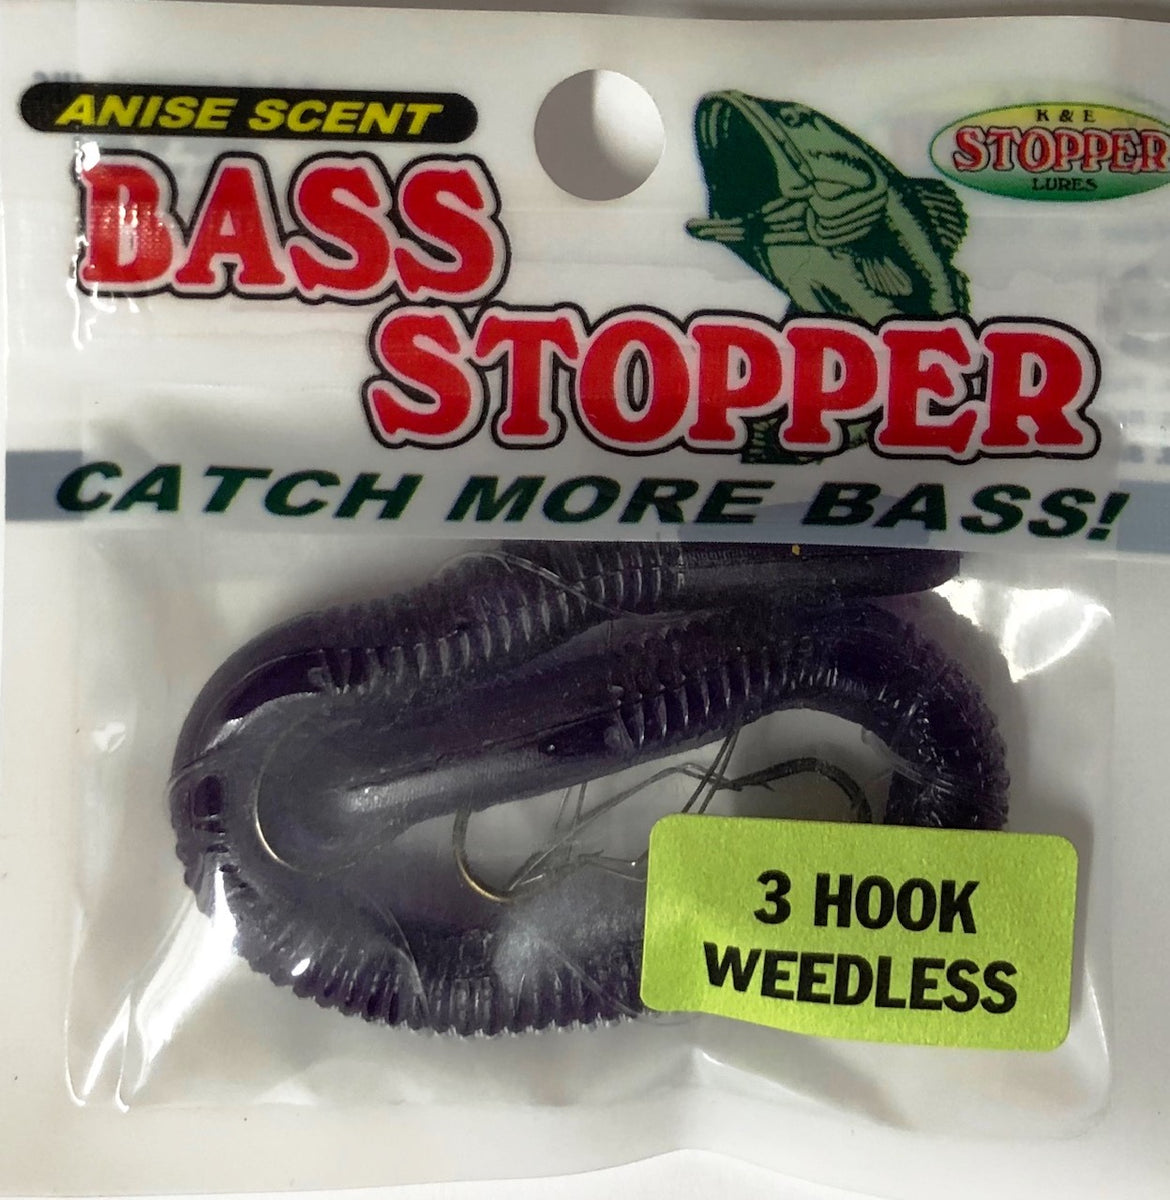 Bass Stopper 3 Hk Weedless Rigged Worms - 6 Pack